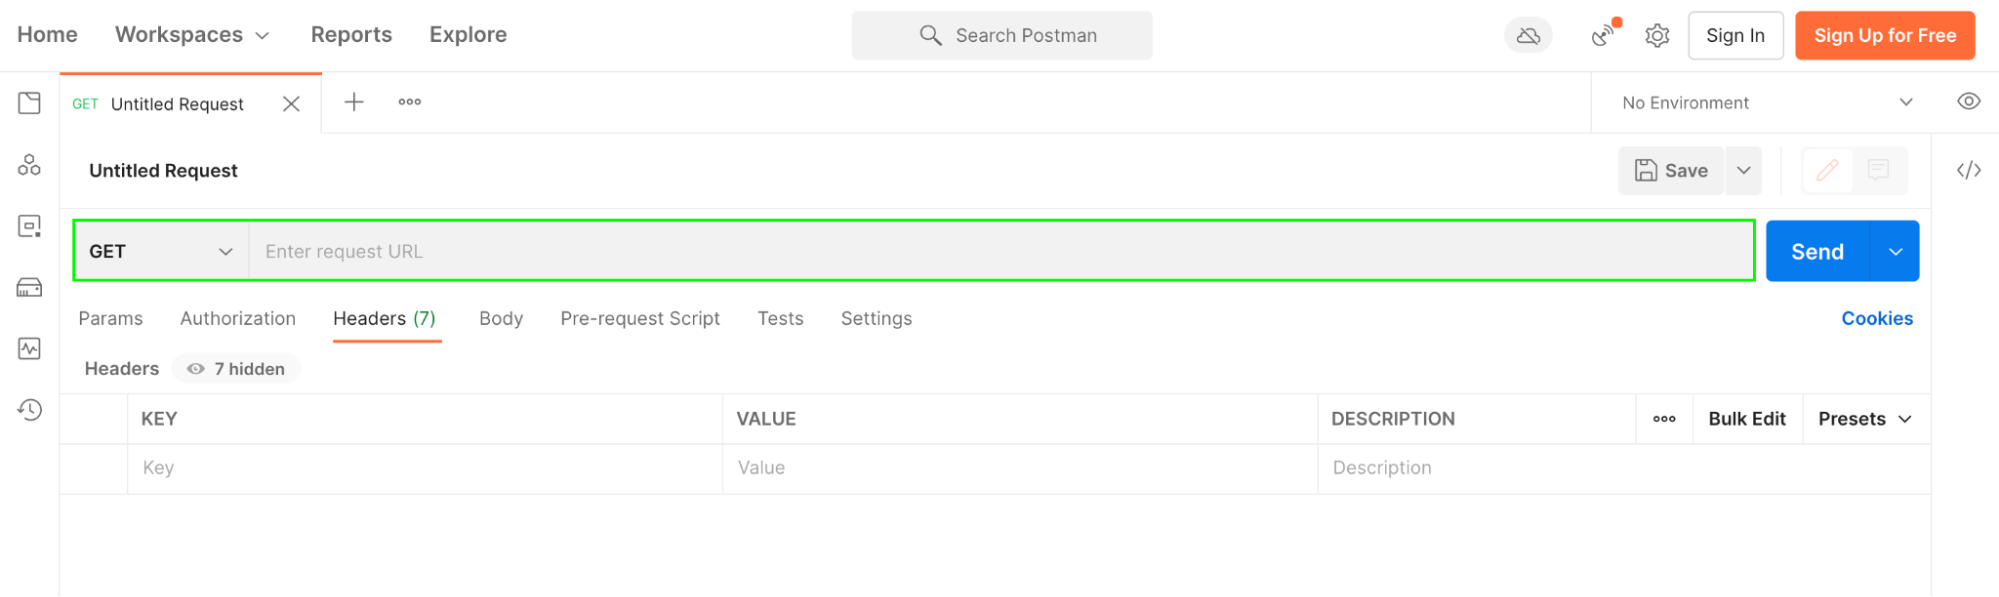 The field used to perform a query in Postman is indicated in green in the Workspaces tab of the interface.